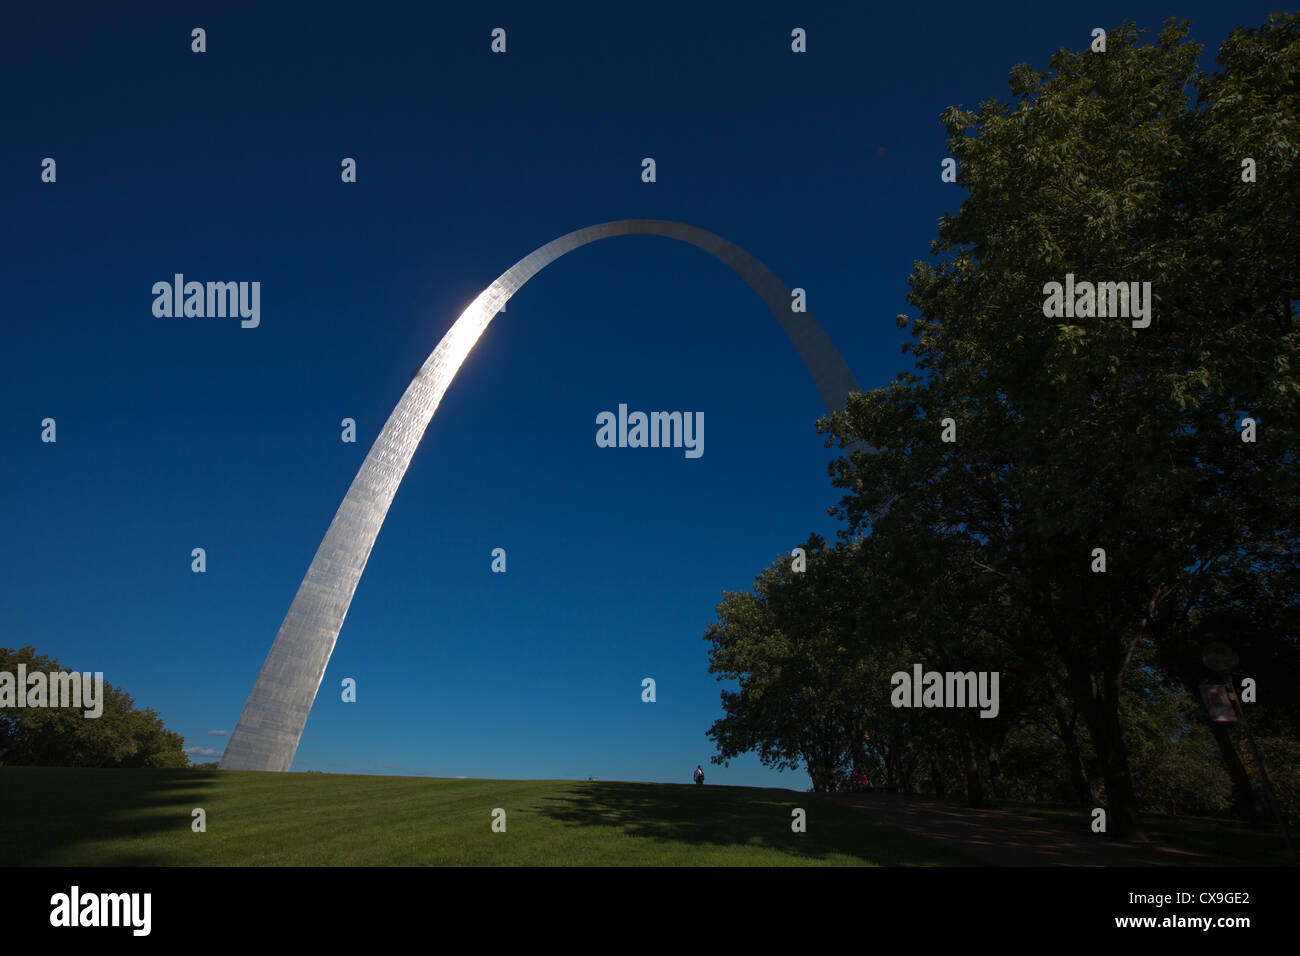 The famous St. Louis arch rises high over downtown and the Mississippi River. Stock Photo